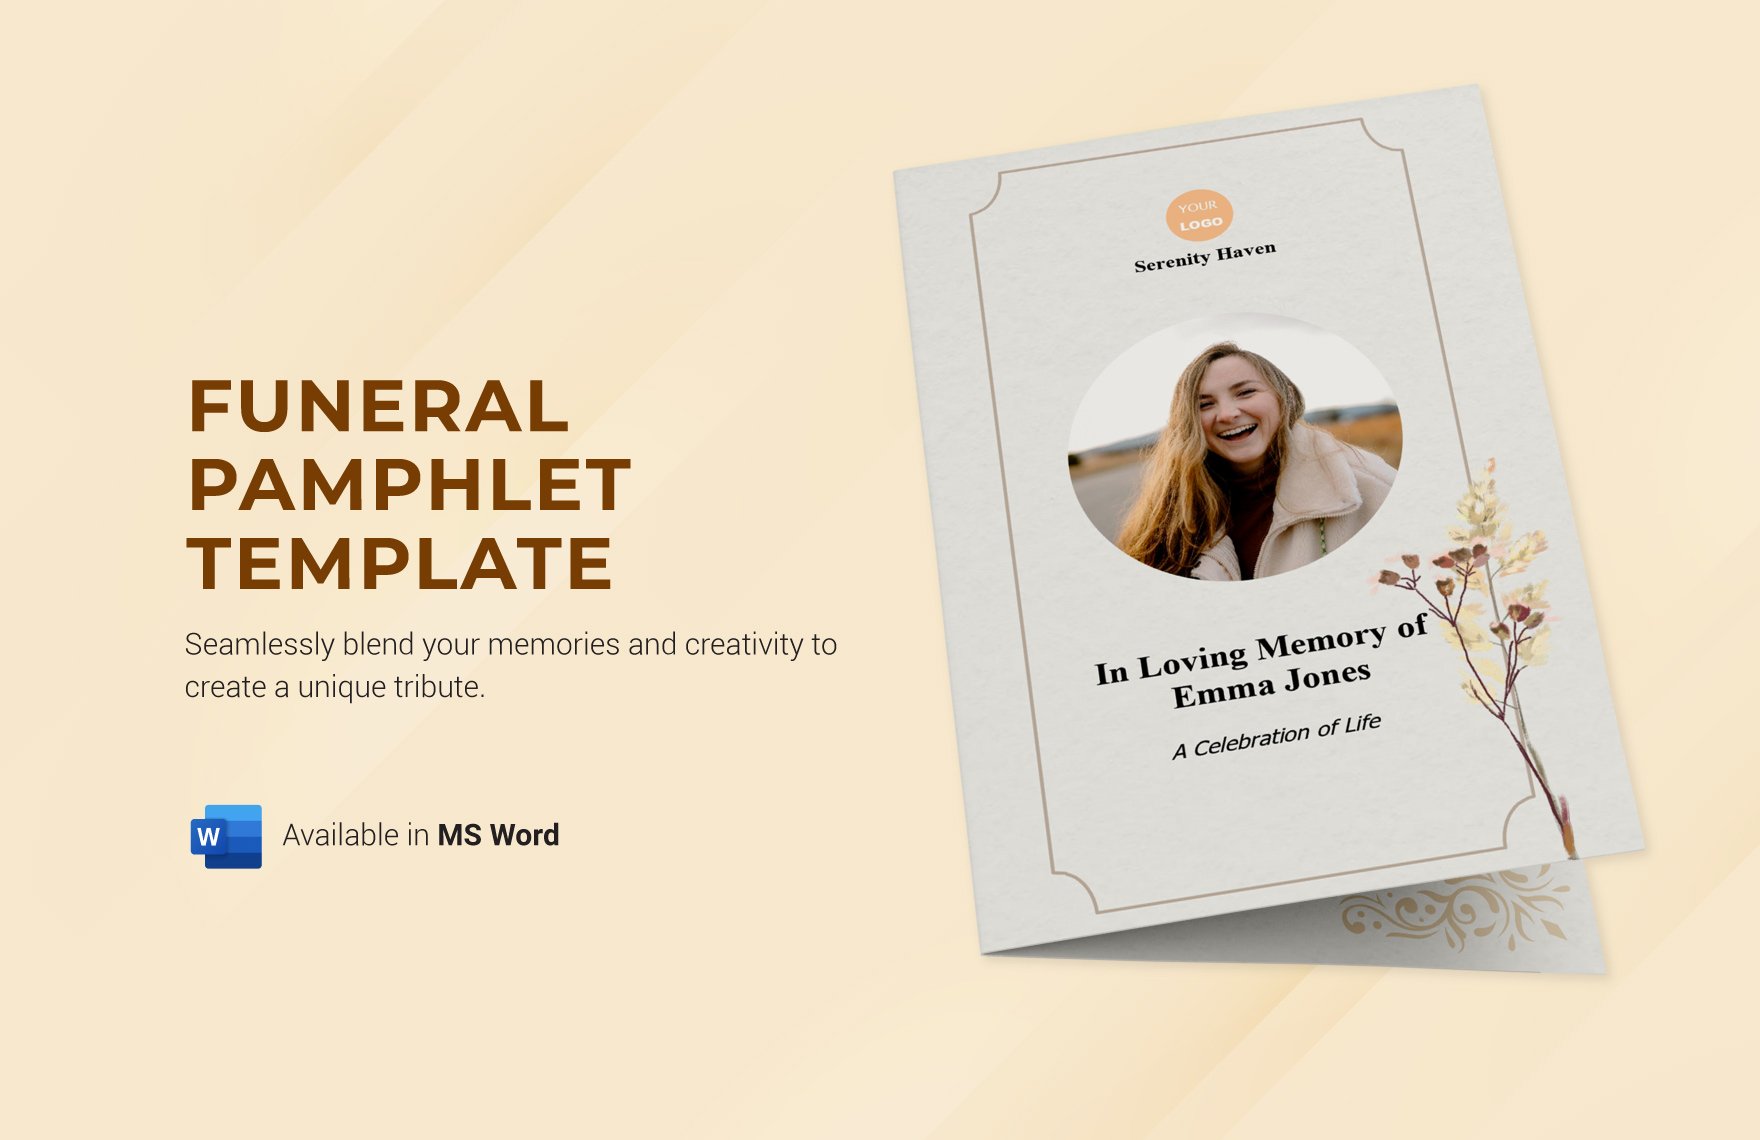 Funeral Pamphlet Template